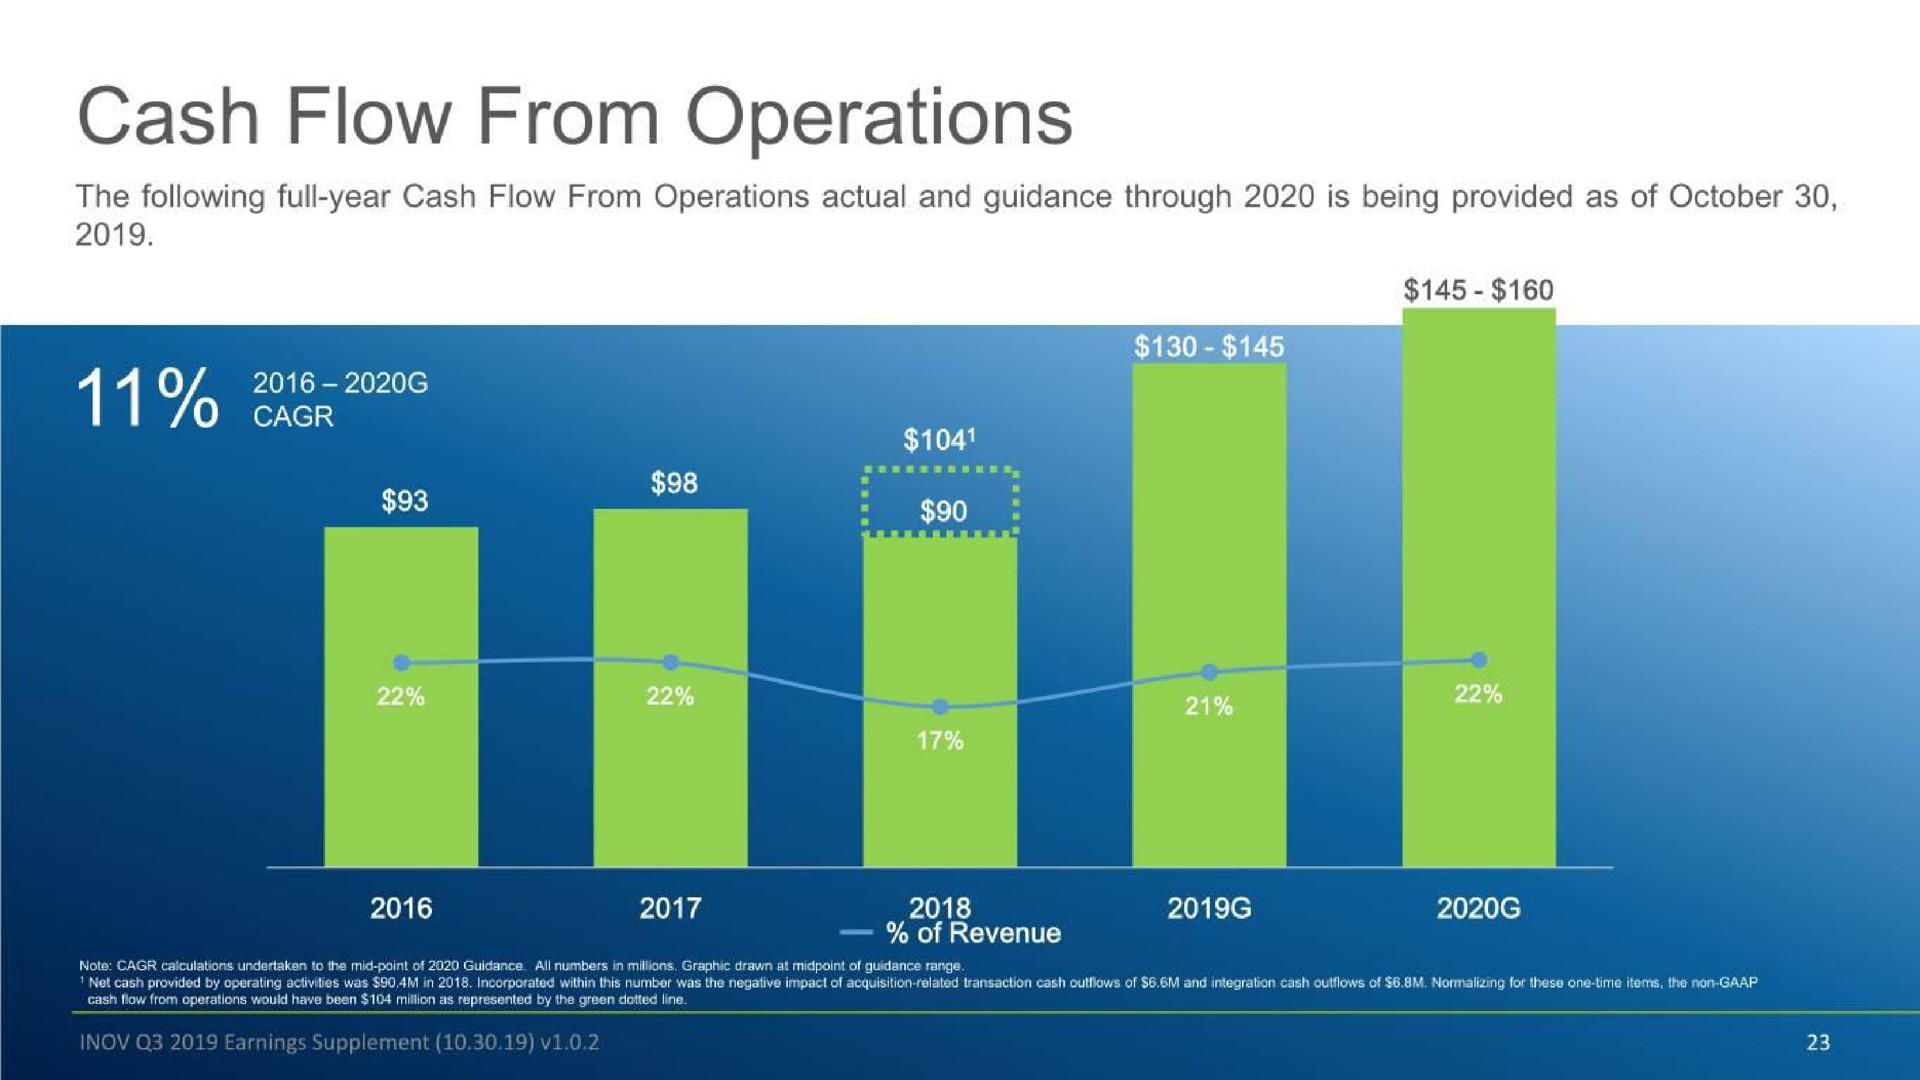 cash flow from operations oes i | Inovalon